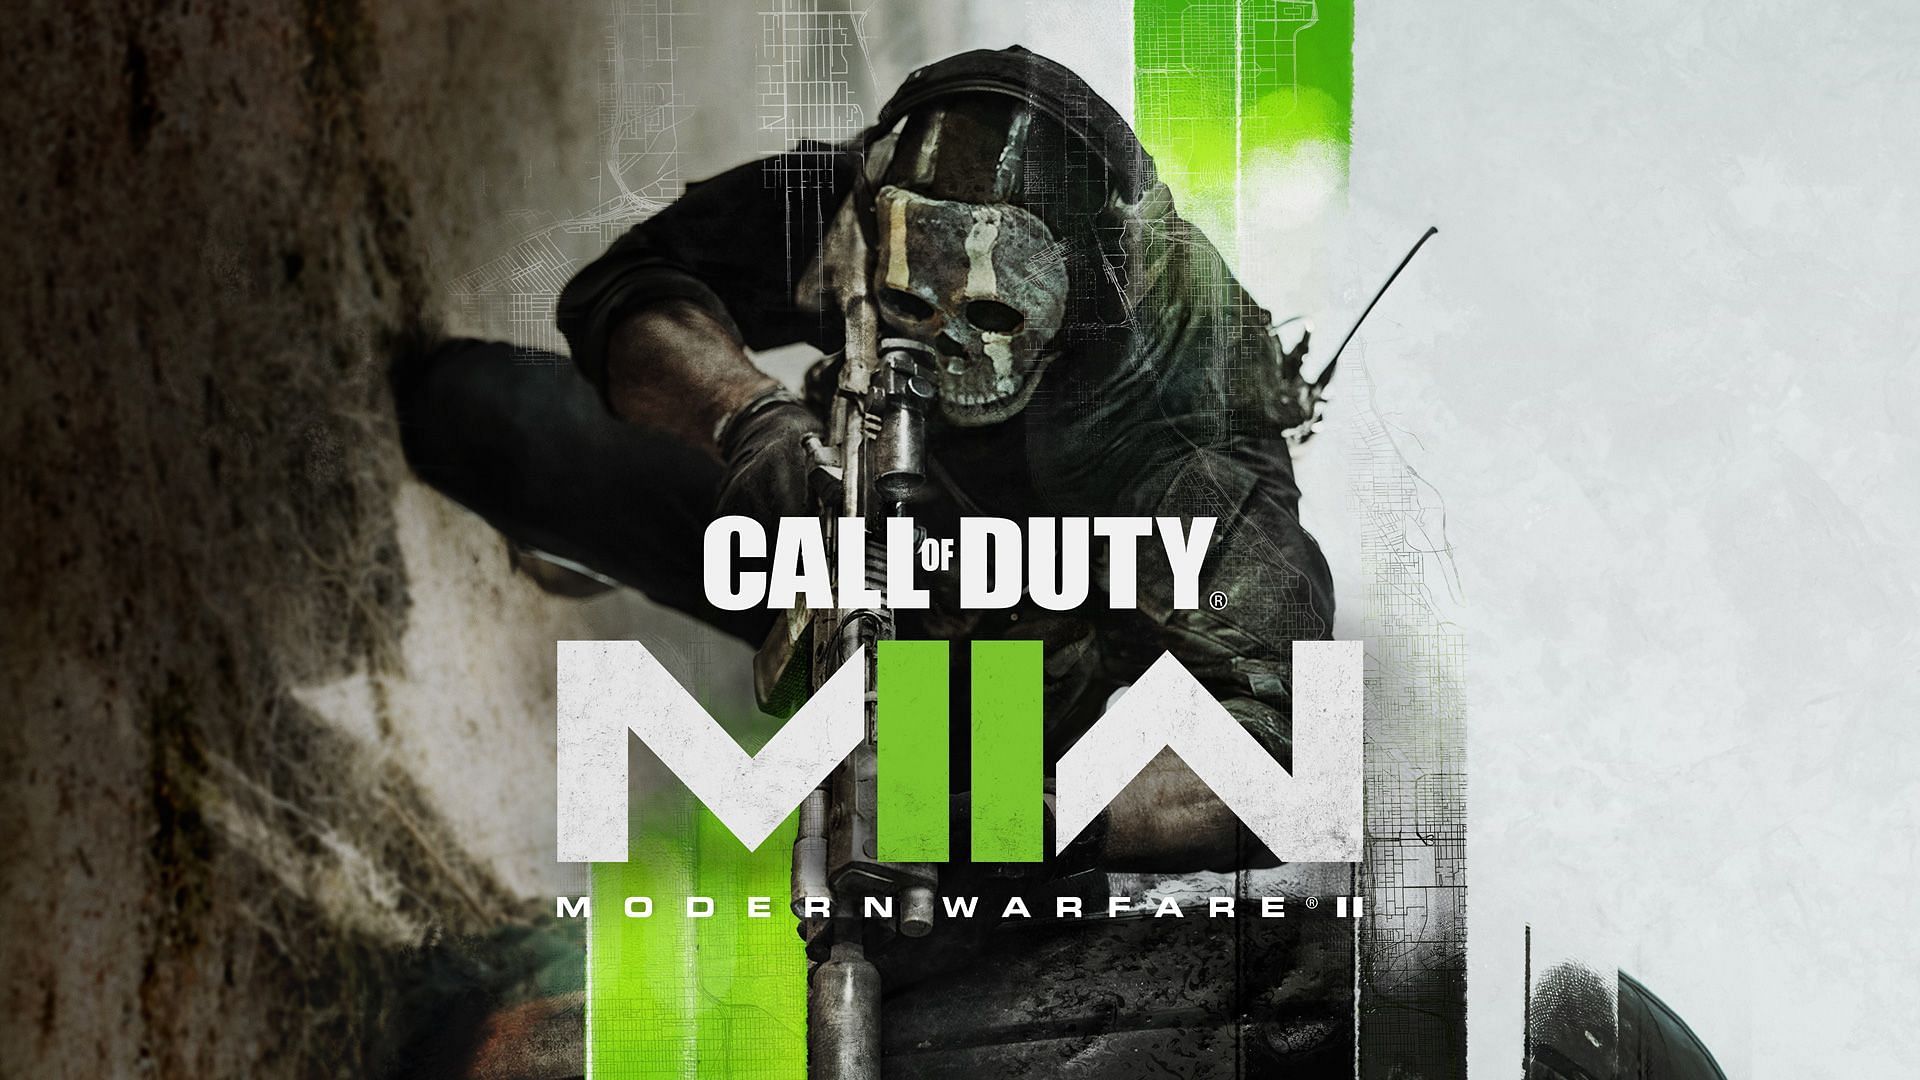 Call of Duty Modern Warfare 2 Beta is set for September (image by Activision)